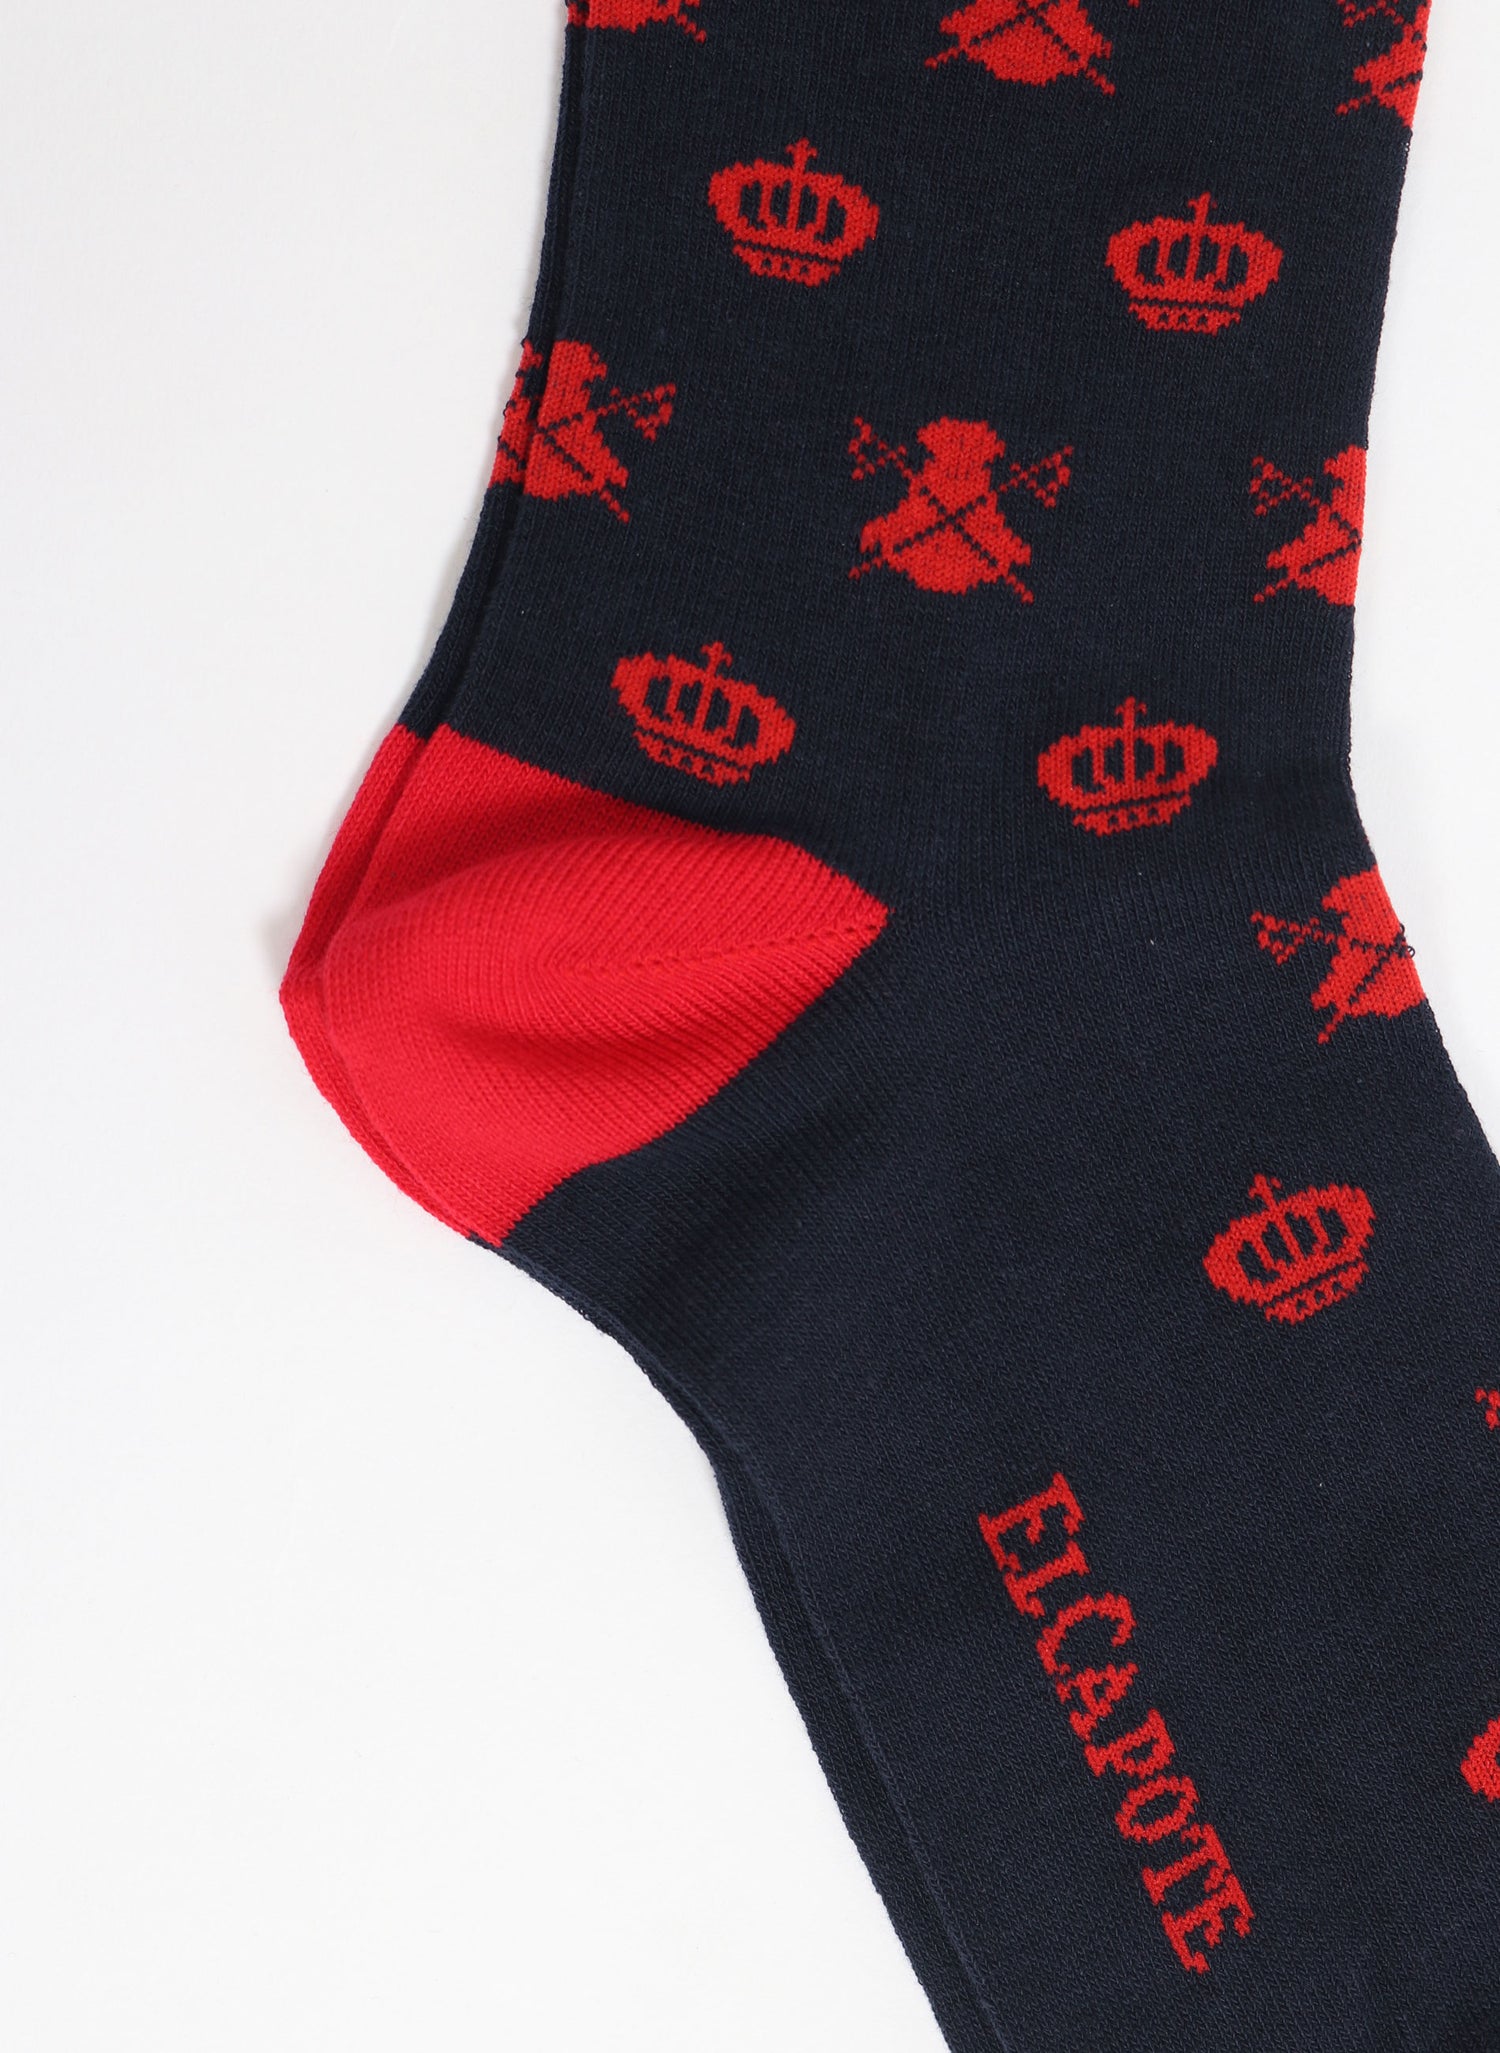 Navy Blue Sock with Red Capes and Crowns 